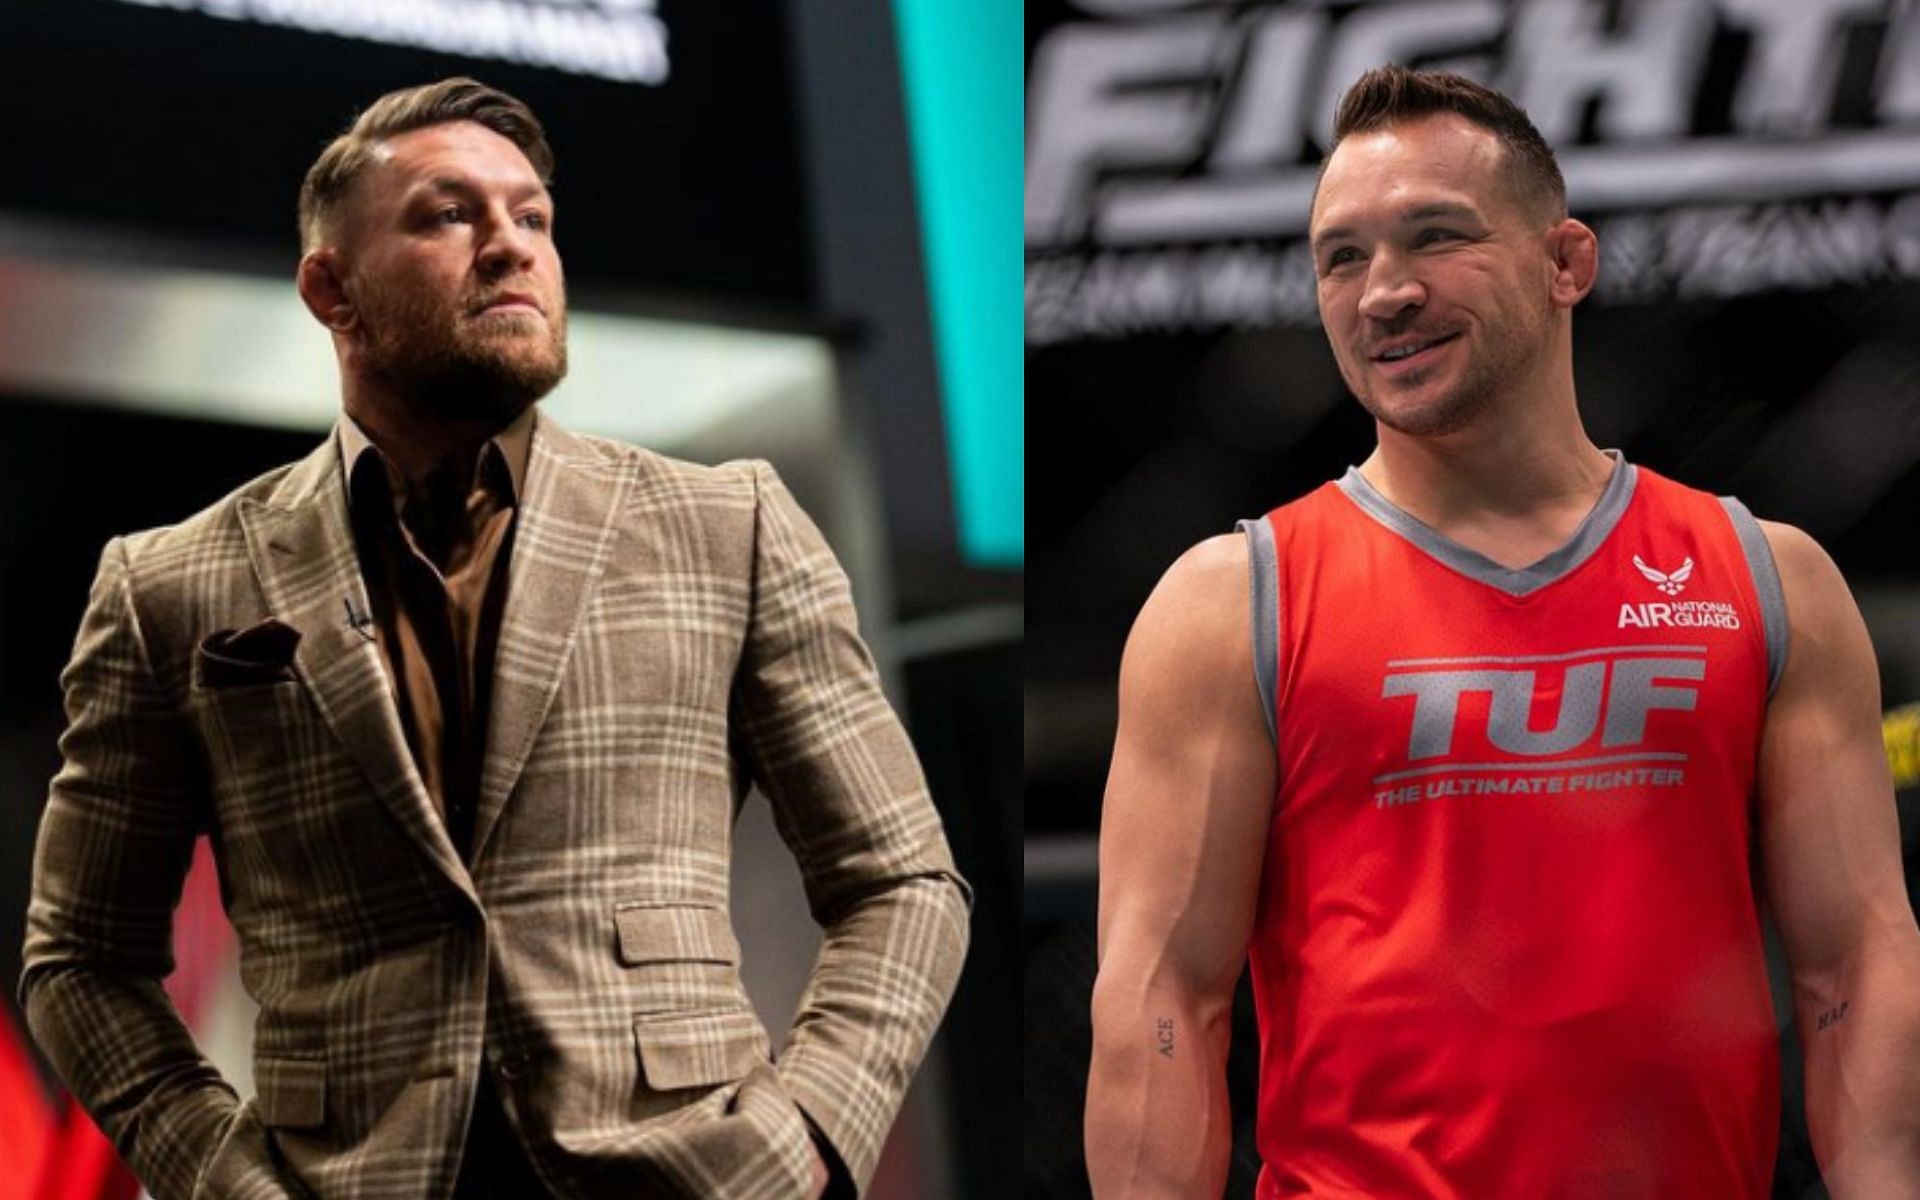 TUF 31: Conor McGregor (Left) and Michael Chandler (Right) [Images via: @ultimatefighter on Instagram]